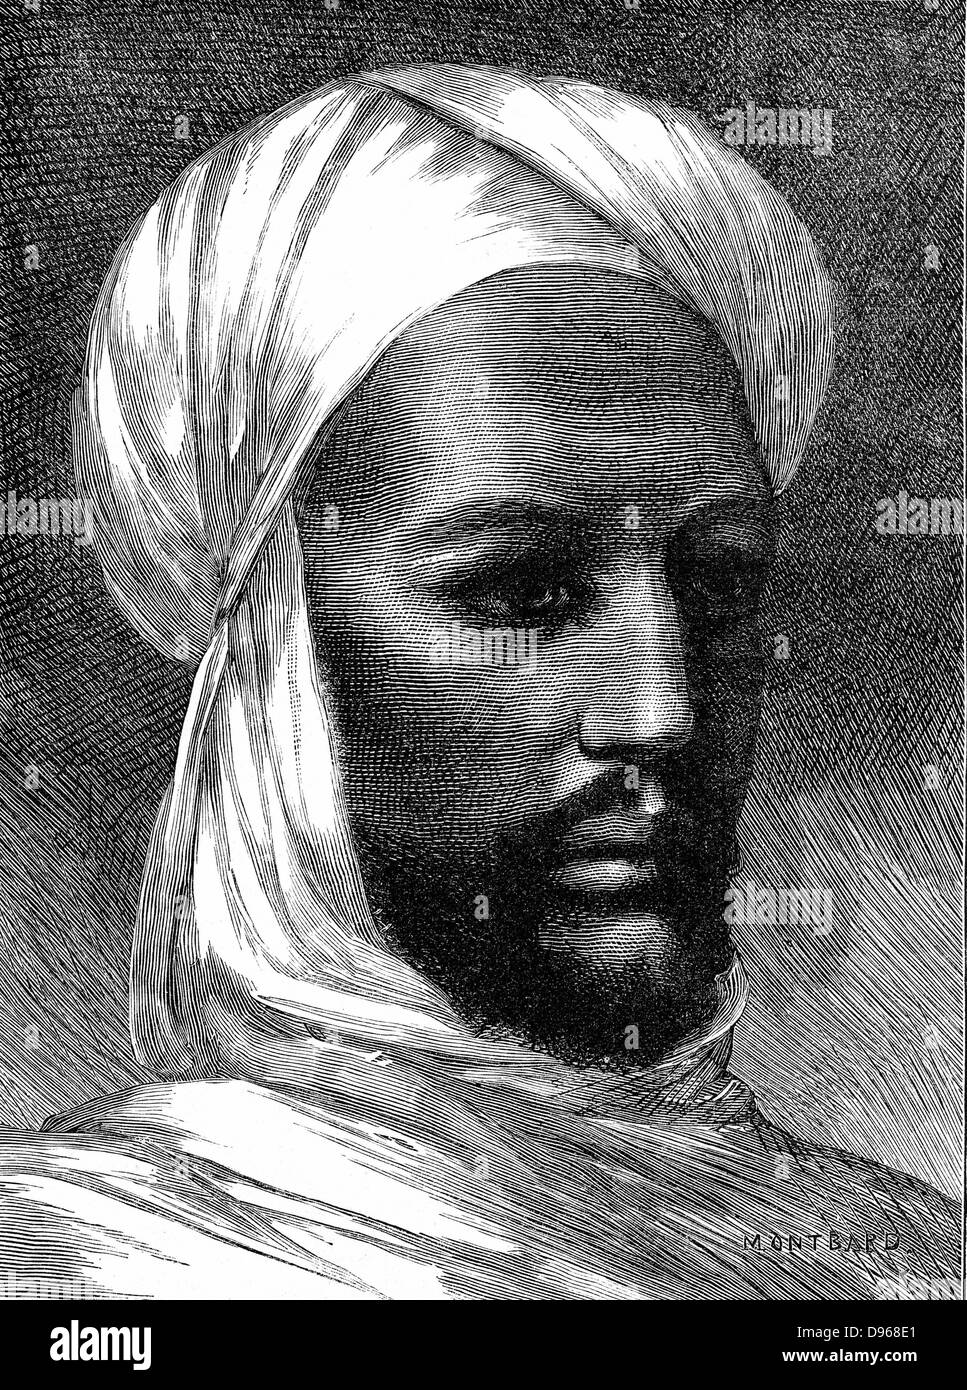 The Mahdi (Mohammed Ahmed 1848-85) Charismatic Muslim leader, slave trader, rebel against Egyptian rule in Eastern Sudan. Defeated British under Gordon at Khartoum in 1885. Wood engraving. Stock Photo